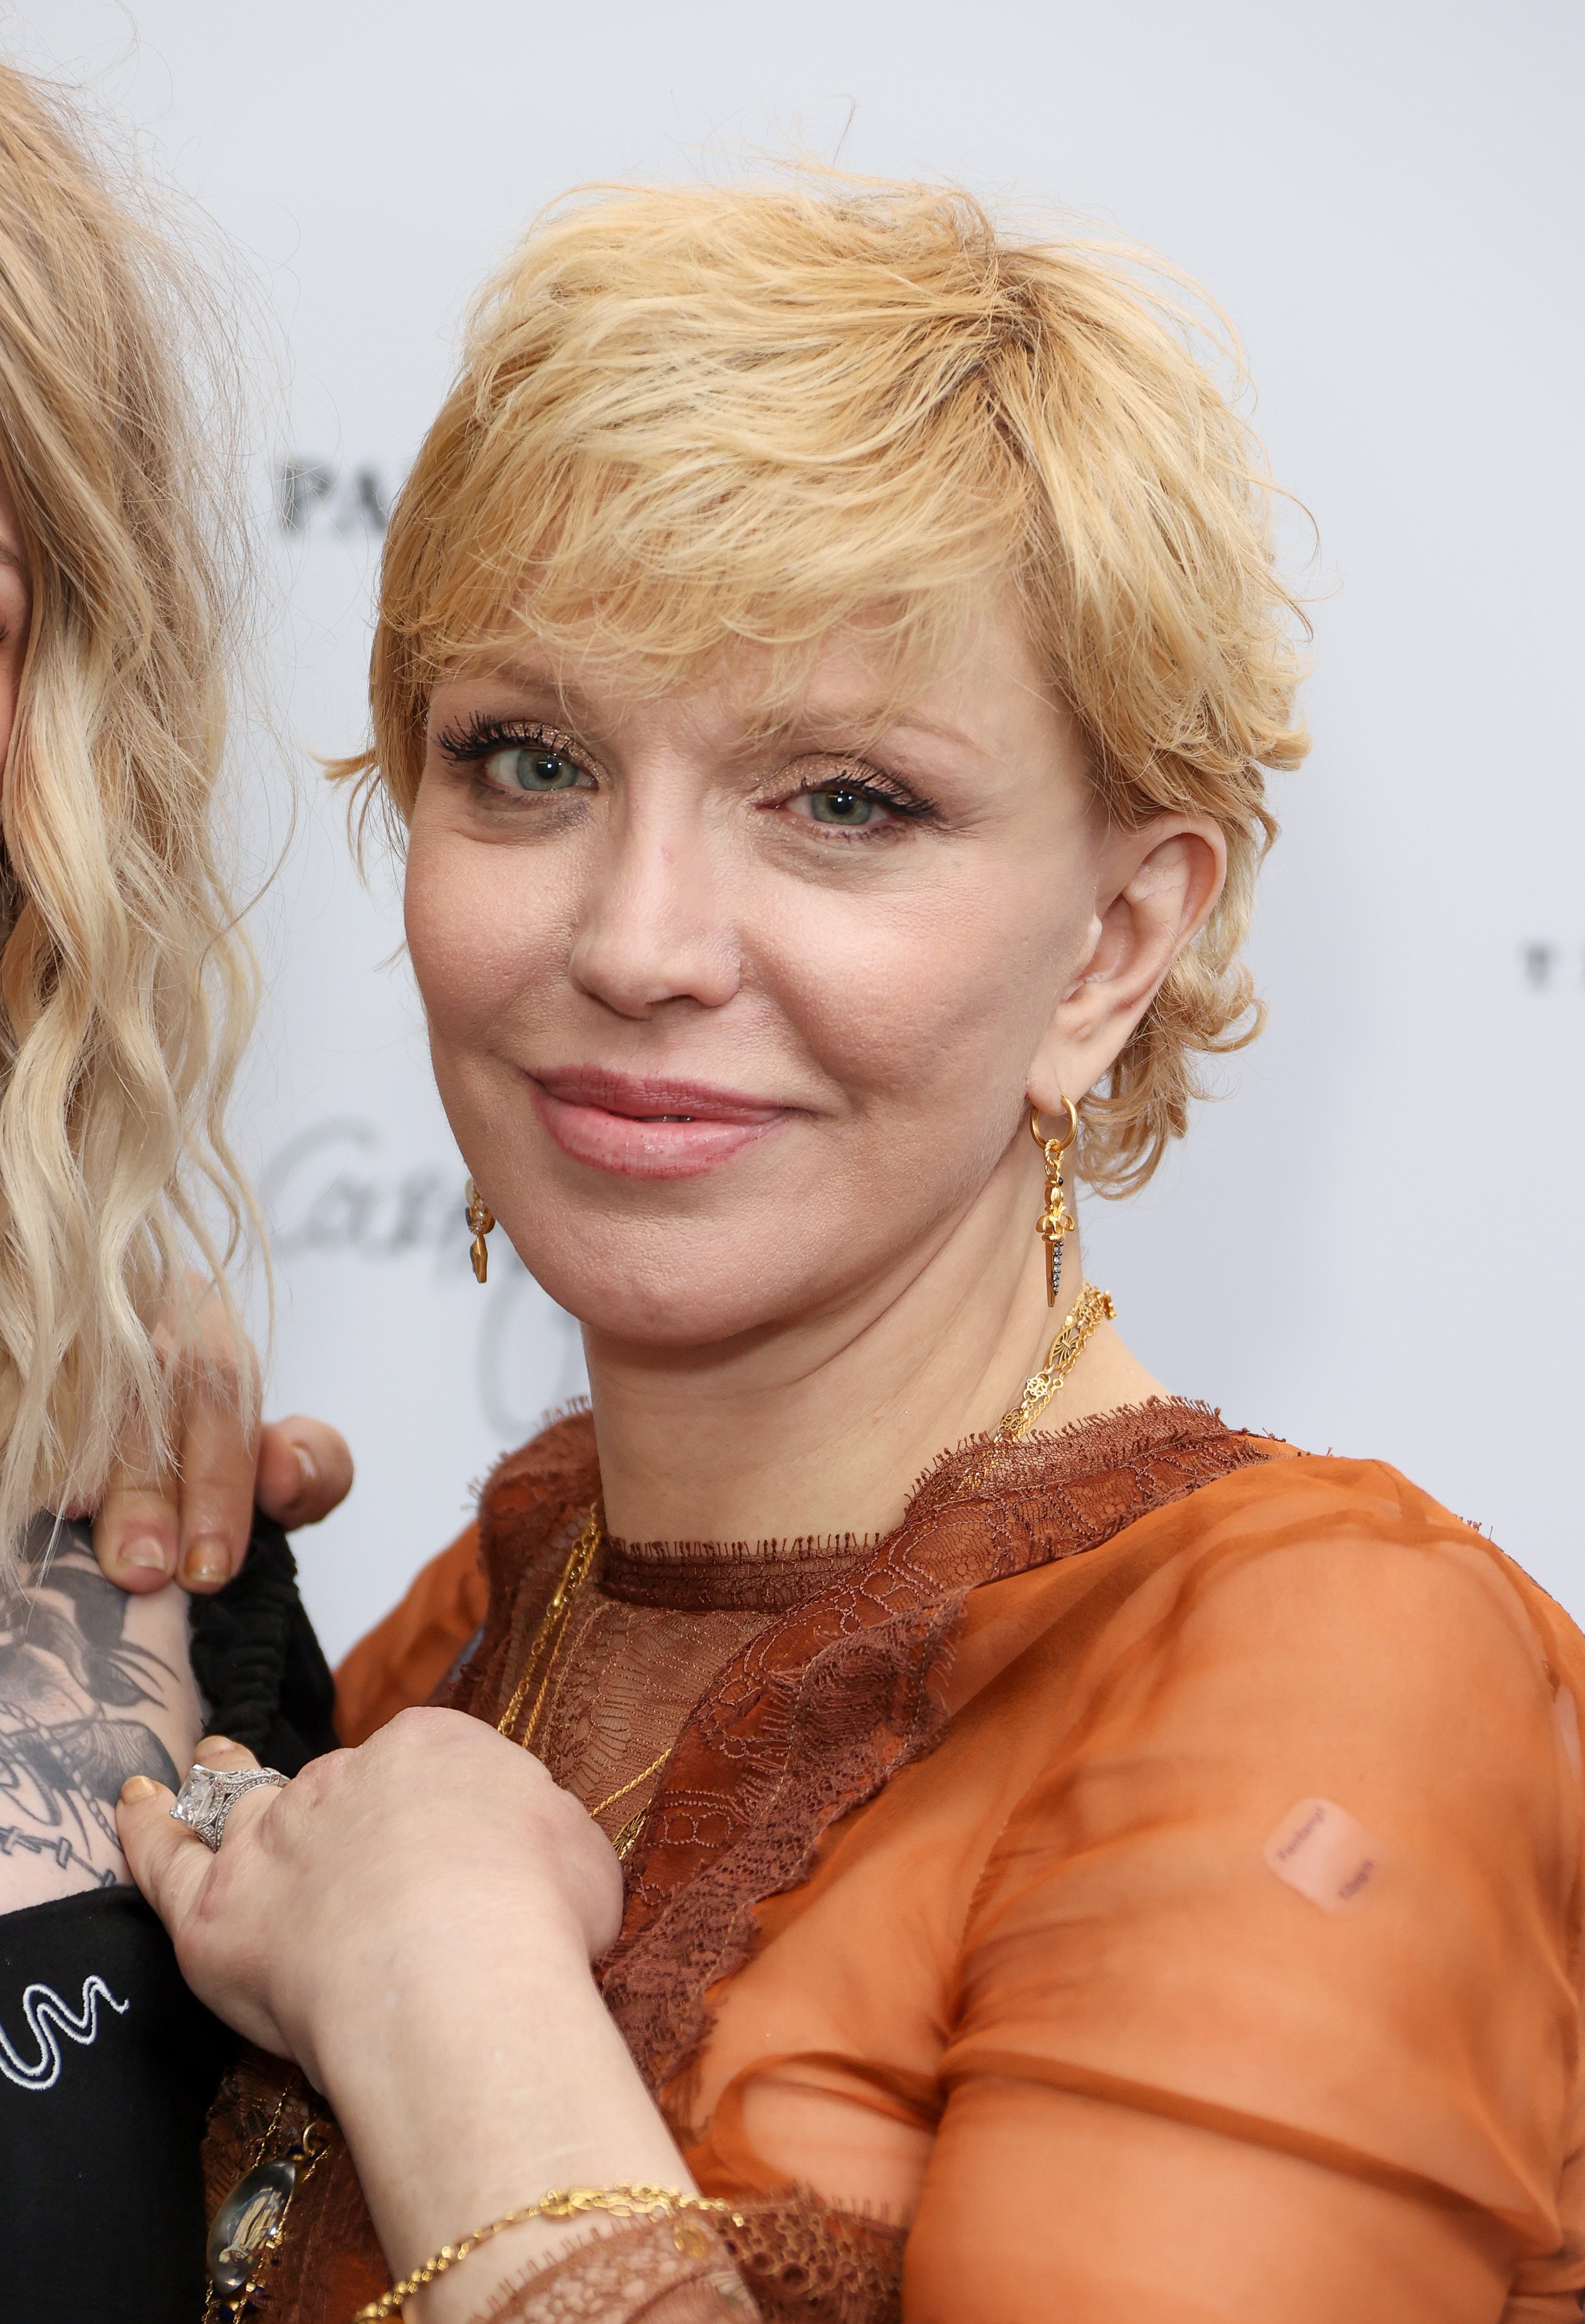 Courtney Love at the "Pretty On The Inside" Courtney Love x Parliament Tattoo exhibition private viewing on September 30, 2021, in London | Source: Getty Images